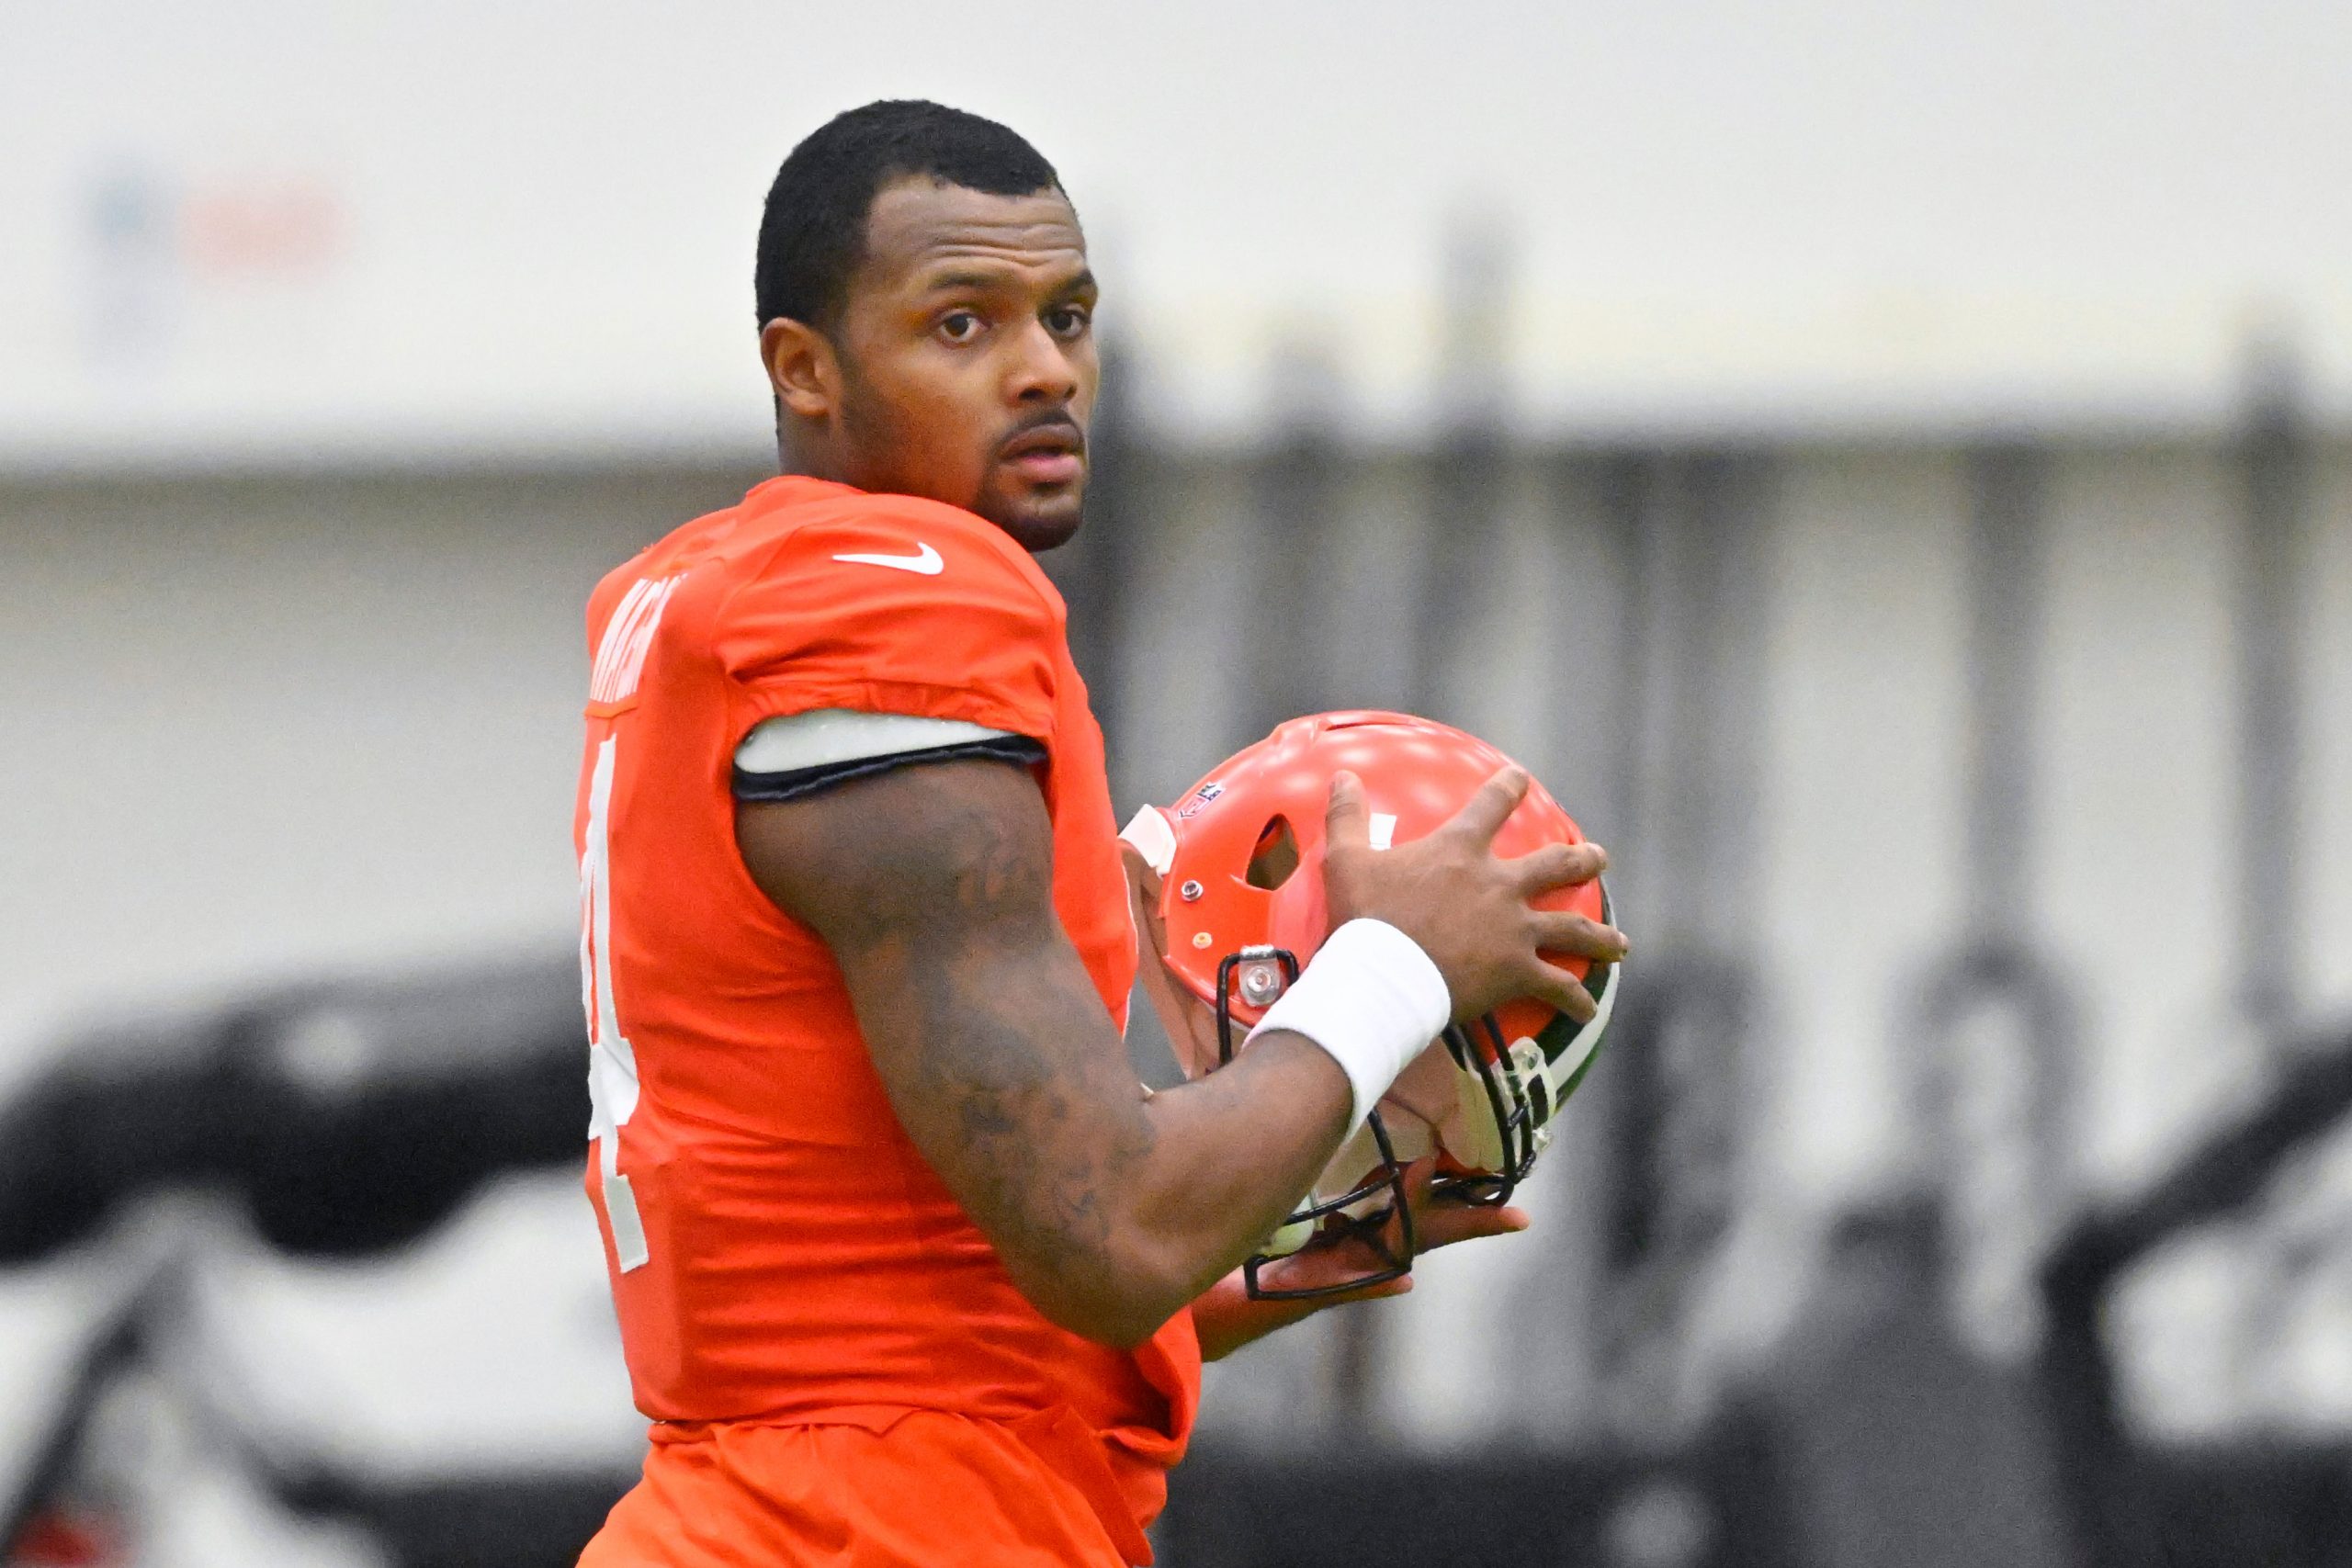 Fans slam NFL, Cleveland Browns after Deshaun Watson, suspended for sexual assault, plays vs Houston Texans